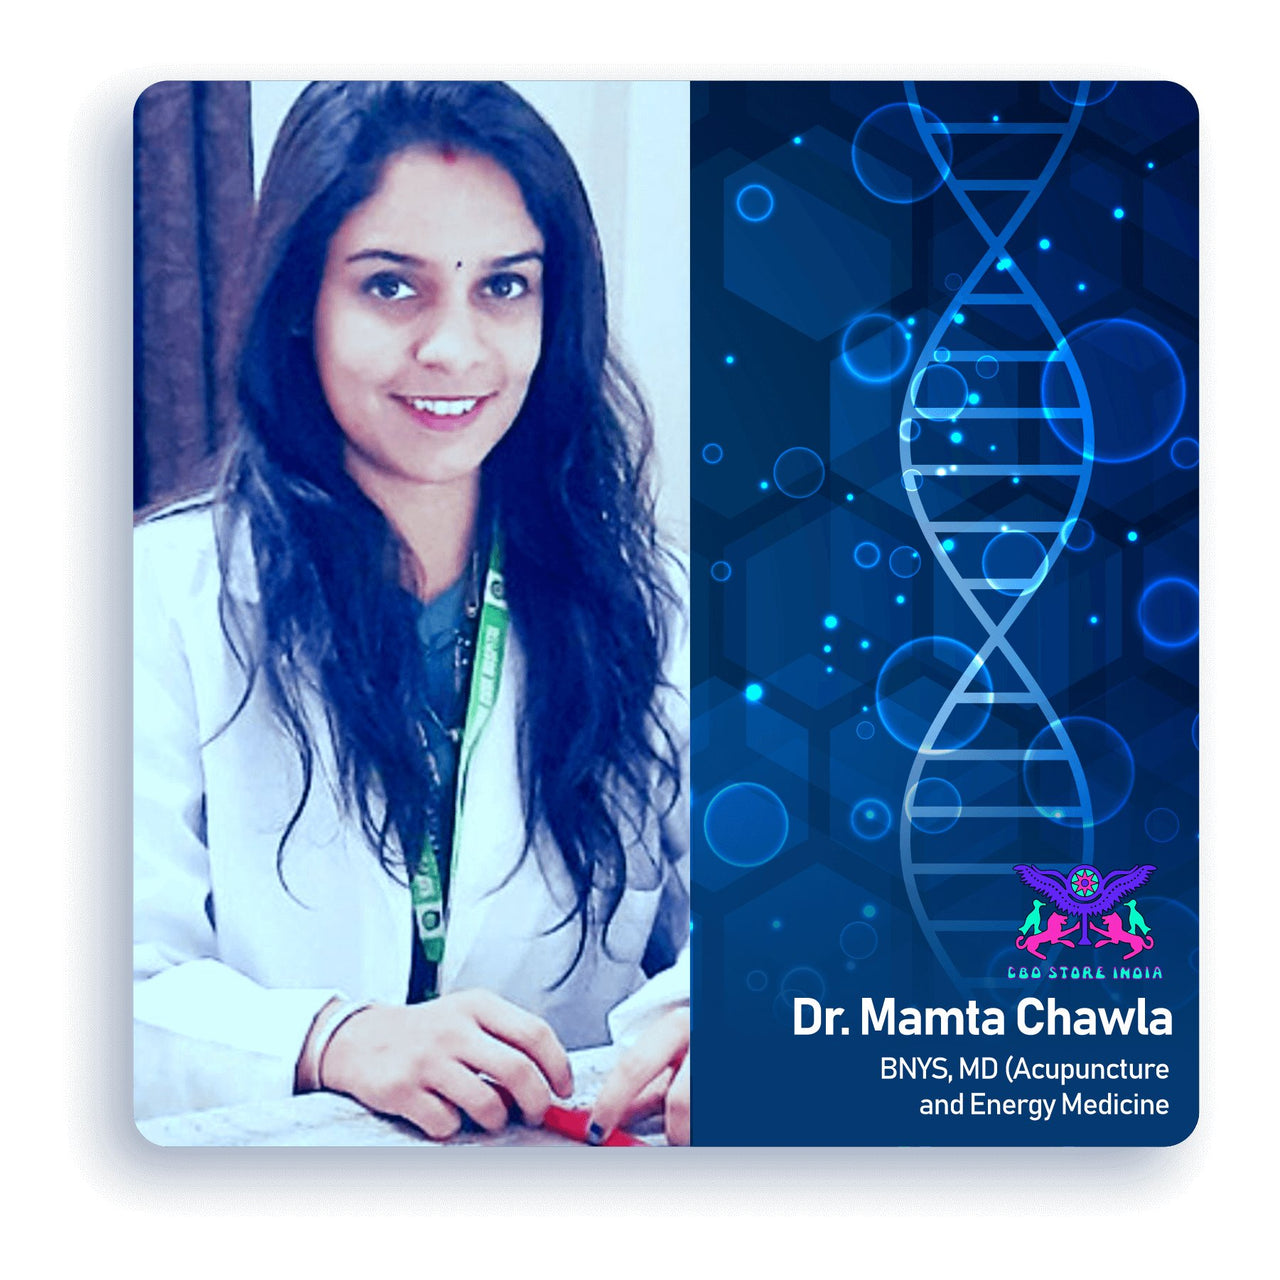 Dr. Mamta Chawla - BNYS, MD (Acupuncture and Energy Medicine) - CBD Store India